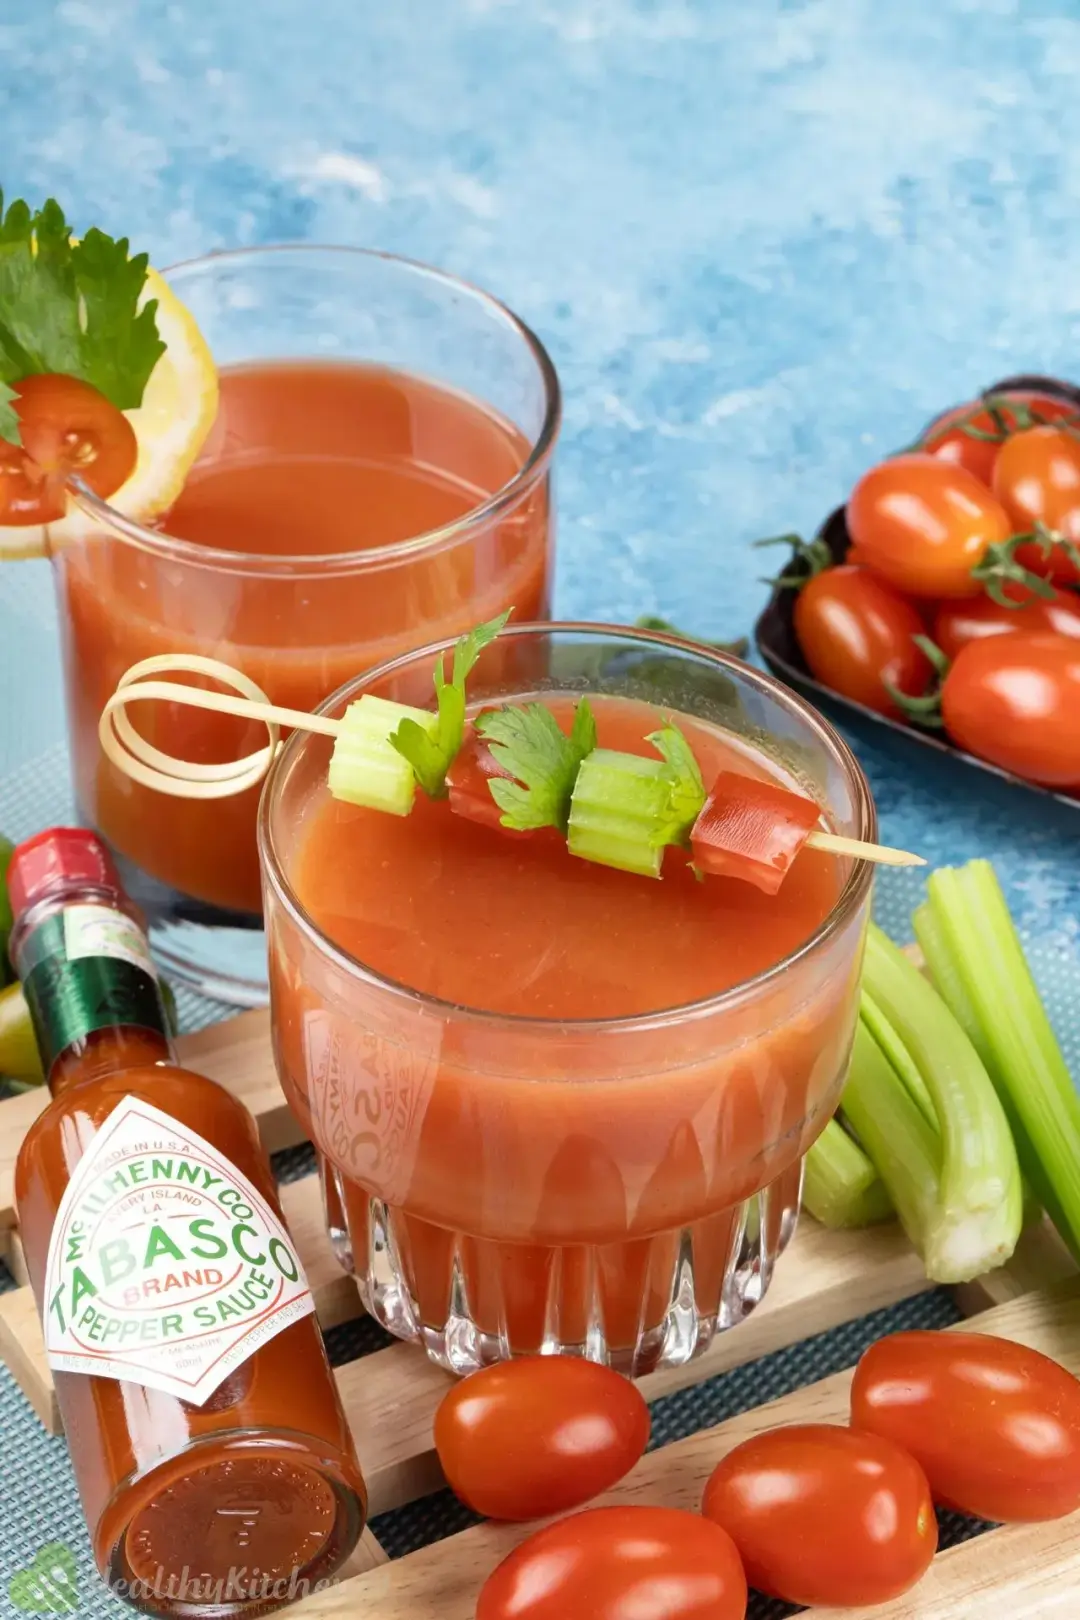 Is Spicy Tomato Juice Good for You